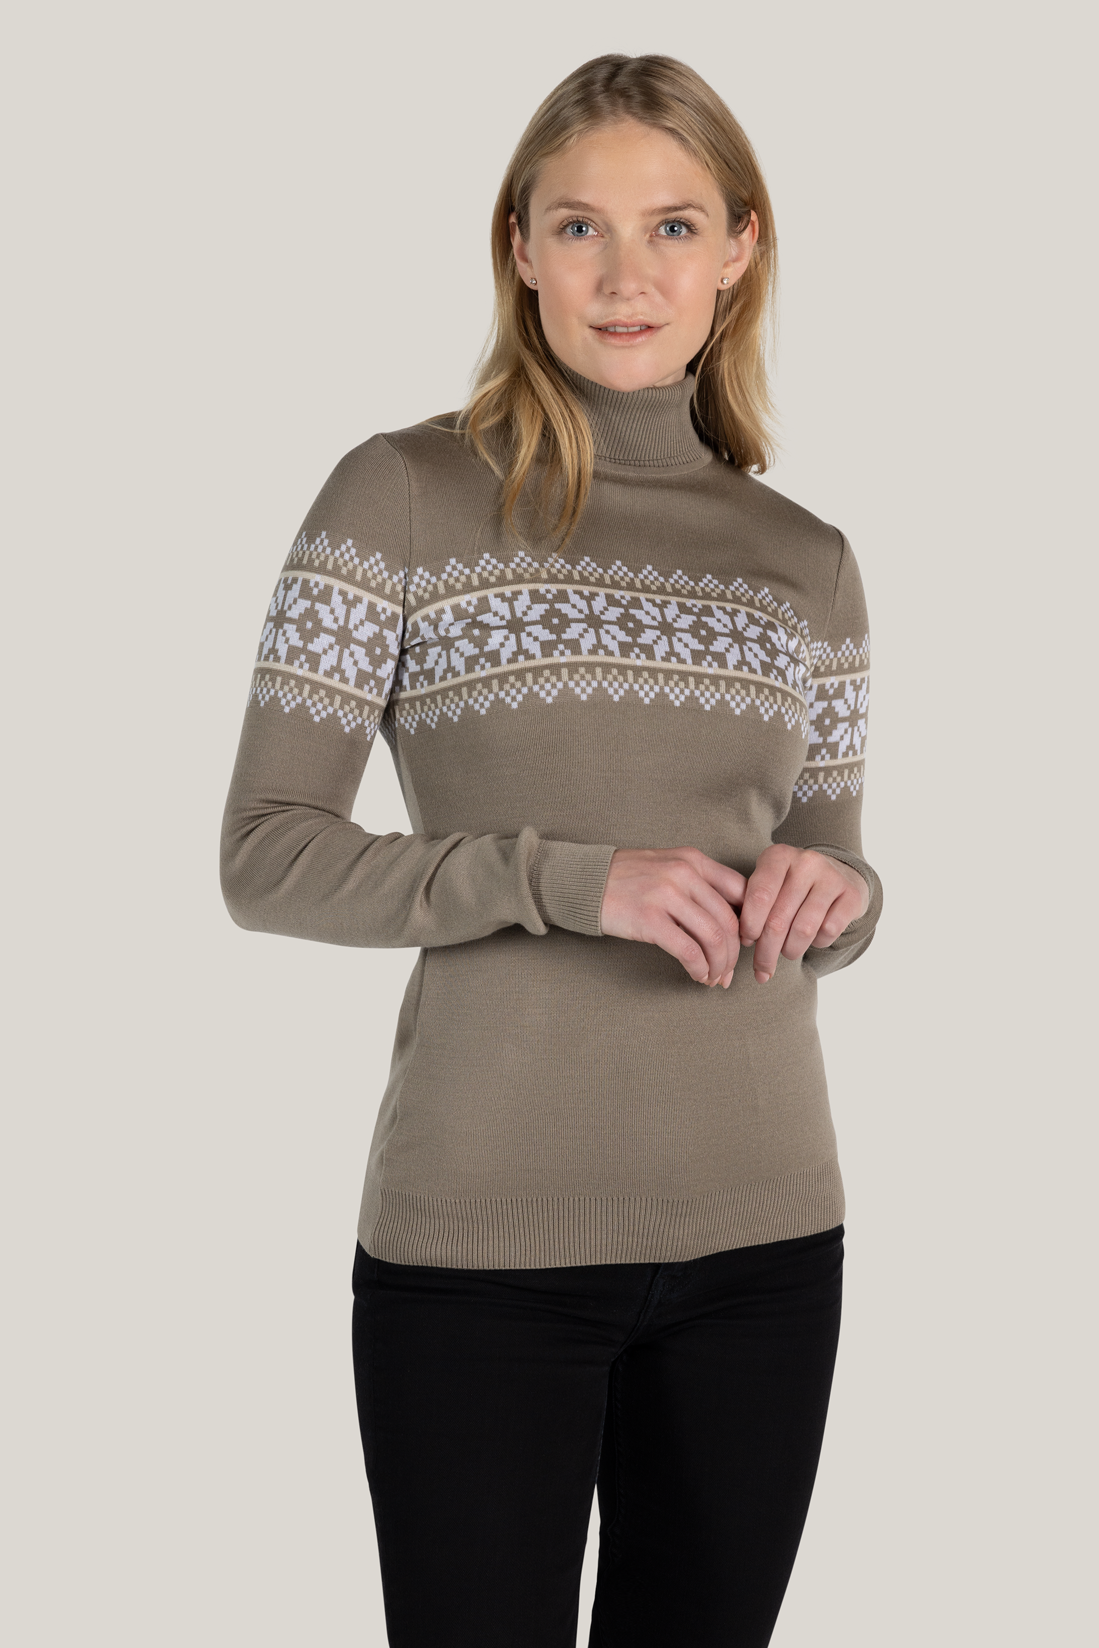 Turtleneck sweater Liv in beige made of Merino and Tencel from Tidløs